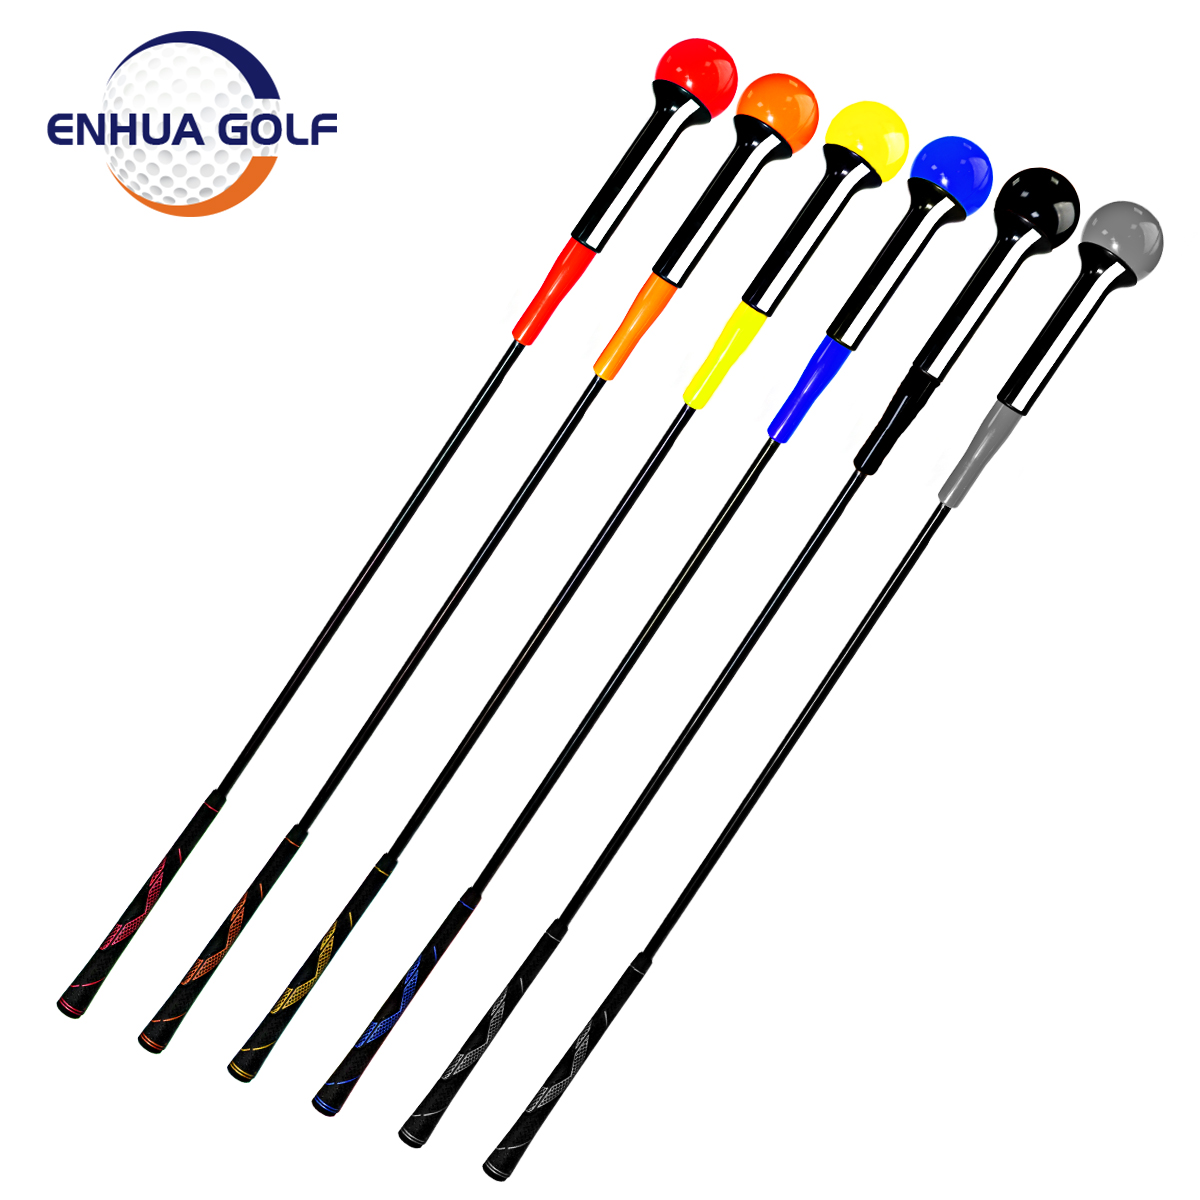 Golf Swing Trainer Enhua Indoor Xtreme Xt-10 Golf Swing Trainers Xt Featured Image